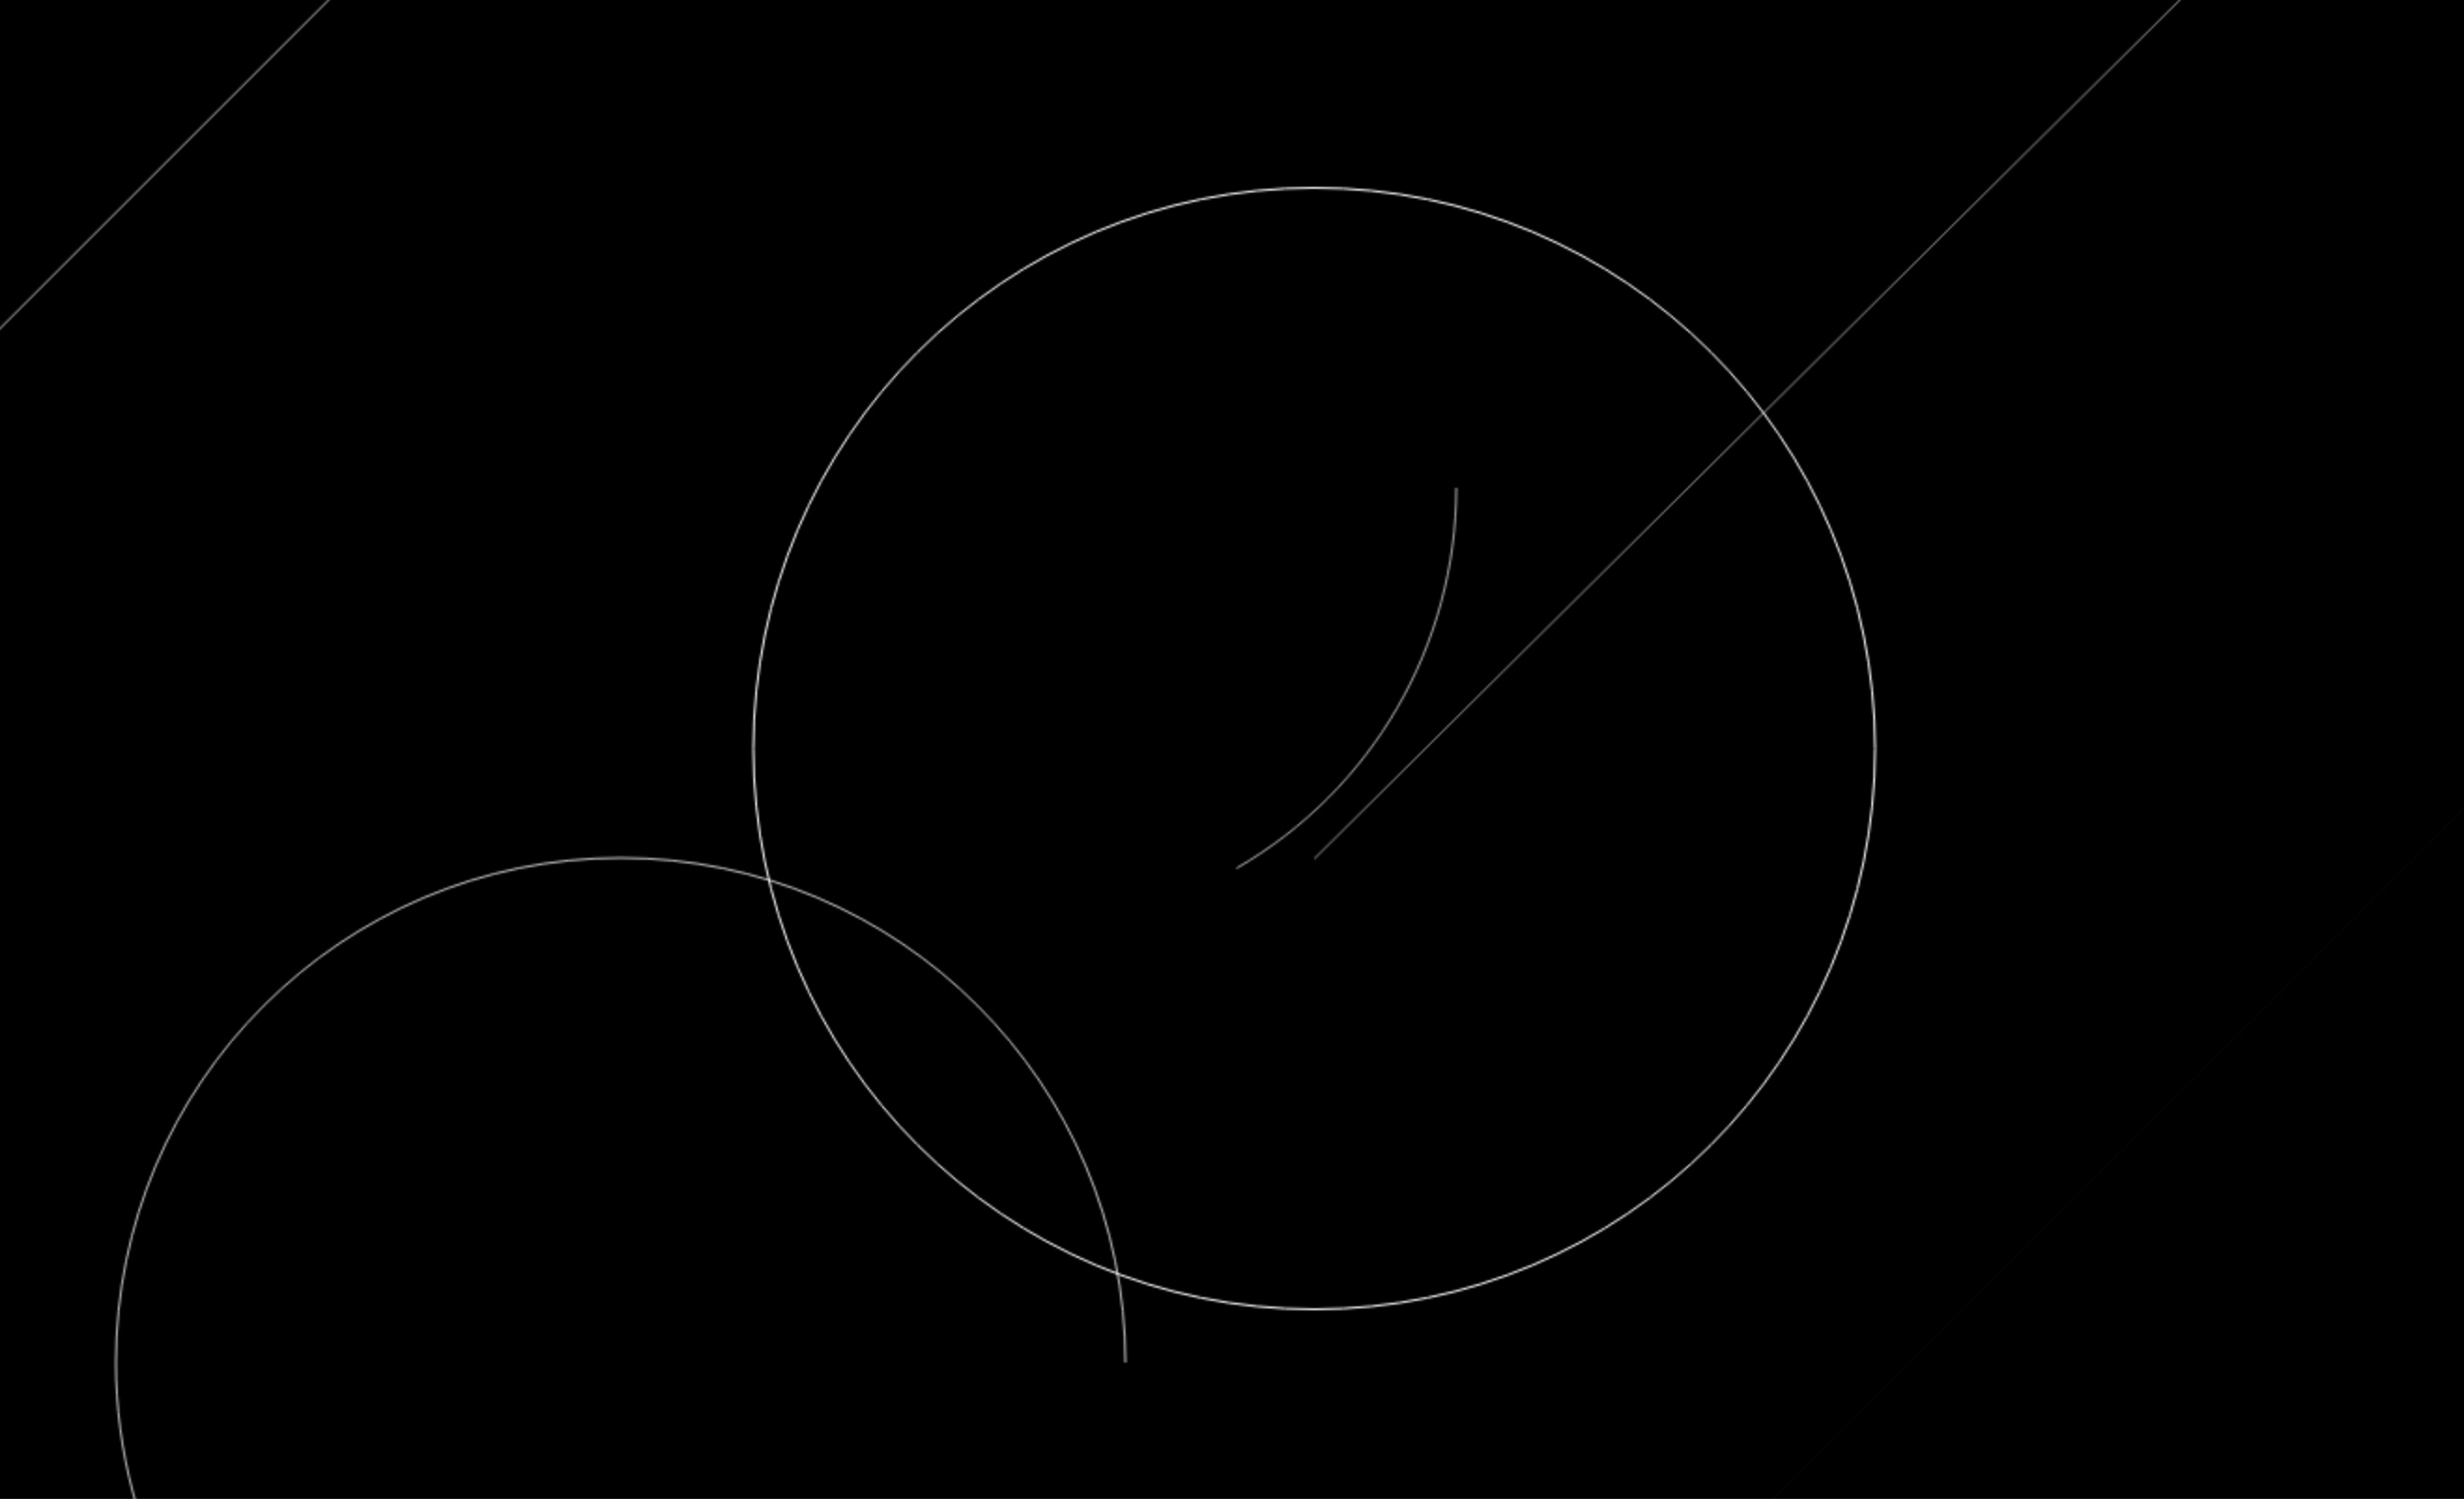 Randomly generated circles and lines from the backgound canvas